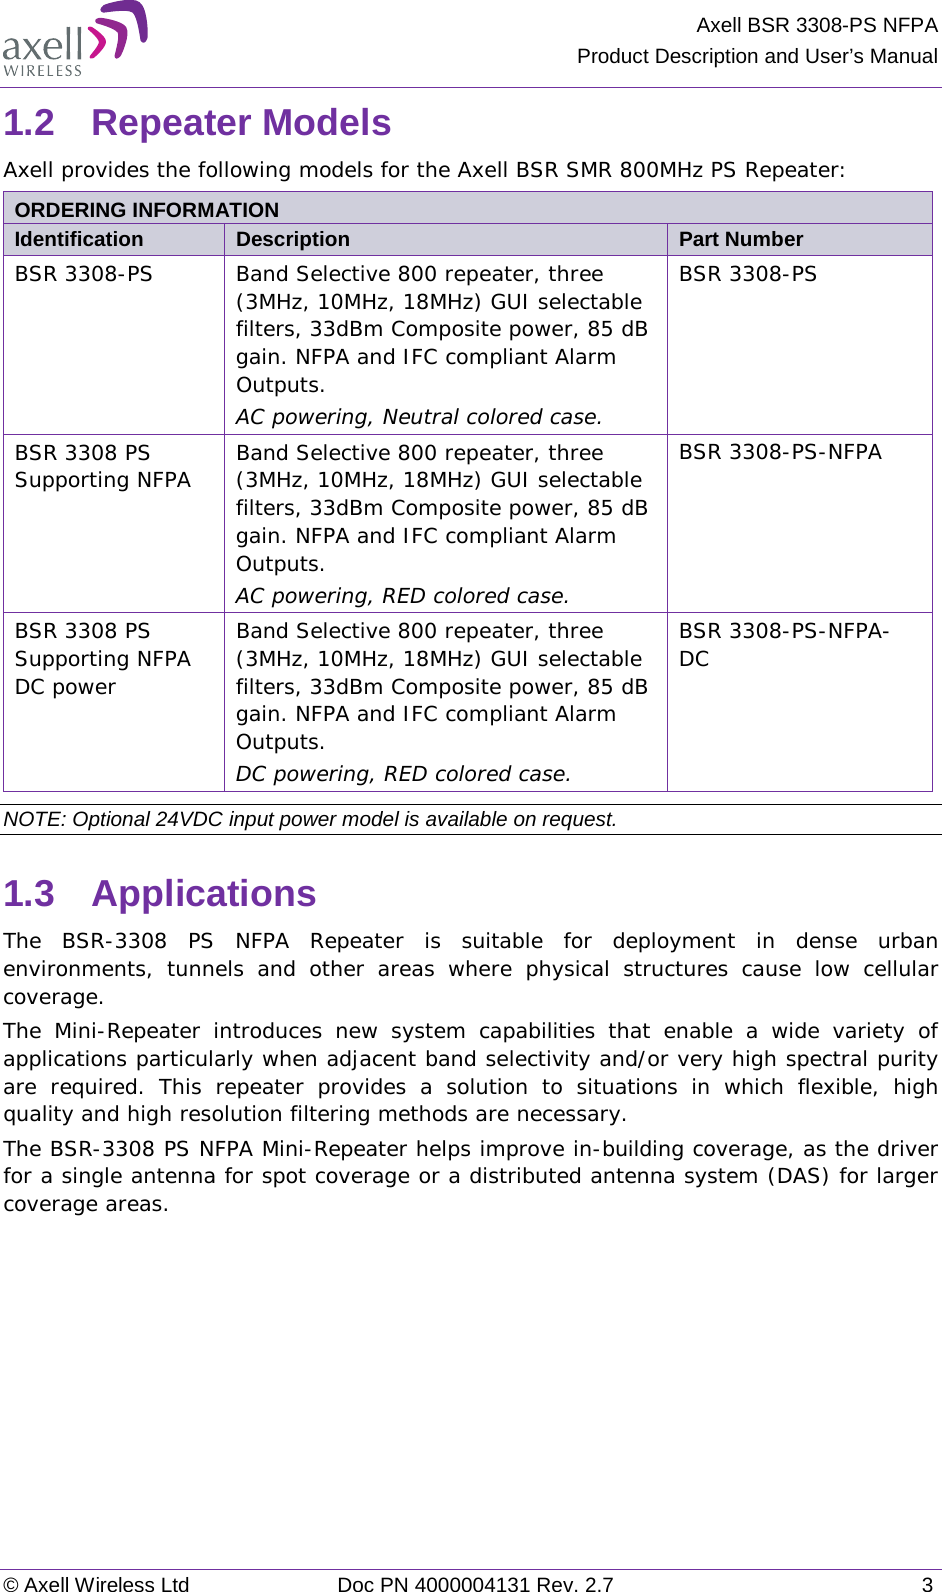 Axell BSR 3308-PS NFPA Product Description and User’s Manual © Axell Wireless Ltd Doc PN 4000004131 Rev. 2.7  3 1.2  Repeater Models  Axell provides the following models for the Axell BSR SMR 800MHz PS Repeater:  ORDERING INFORMATION  Identification Description Part Number BSR 3308-PS Band Selective 800 repeater, three (3MHz, 10MHz, 18MHz) GUI selectable filters, 33dBm Composite power, 85 dB gain. NFPA and IFC compliant Alarm Outputs. AC powering, Neutral colored case. BSR 3308-PS BSR 3308 PS Supporting NFPA Band Selective 800 repeater, three (3MHz, 10MHz, 18MHz) GUI selectable filters, 33dBm Composite power, 85 dB gain. NFPA and IFC compliant Alarm Outputs. AC powering, RED colored case. BSR 3308-PS-NFPA BSR 3308 PS Supporting NFPA  DC power Band Selective 800 repeater, three (3MHz, 10MHz, 18MHz) GUI selectable filters, 33dBm Composite power, 85 dB gain. NFPA and IFC compliant Alarm Outputs. DC powering, RED colored case. BSR 3308-PS-NFPA-DC NOTE: Optional 24VDC input power model is available on request. 1.3  Applications The BSR-3308 PS NFPA Repeater is suitable for deployment in dense urban environments, tunnels and other areas where physical structures cause low cellular coverage.  The Mini-Repeater introduces new system capabilities that enable a wide variety of applications particularly when adjacent band selectivity and/or very high spectral purity are required. This repeater provides a solution to situations in which flexible, high quality and high resolution filtering methods are necessary.  The BSR-3308 PS NFPA Mini-Repeater helps improve in-building coverage, as the driver for a single antenna for spot coverage or a distributed antenna system (DAS) for larger coverage areas.    